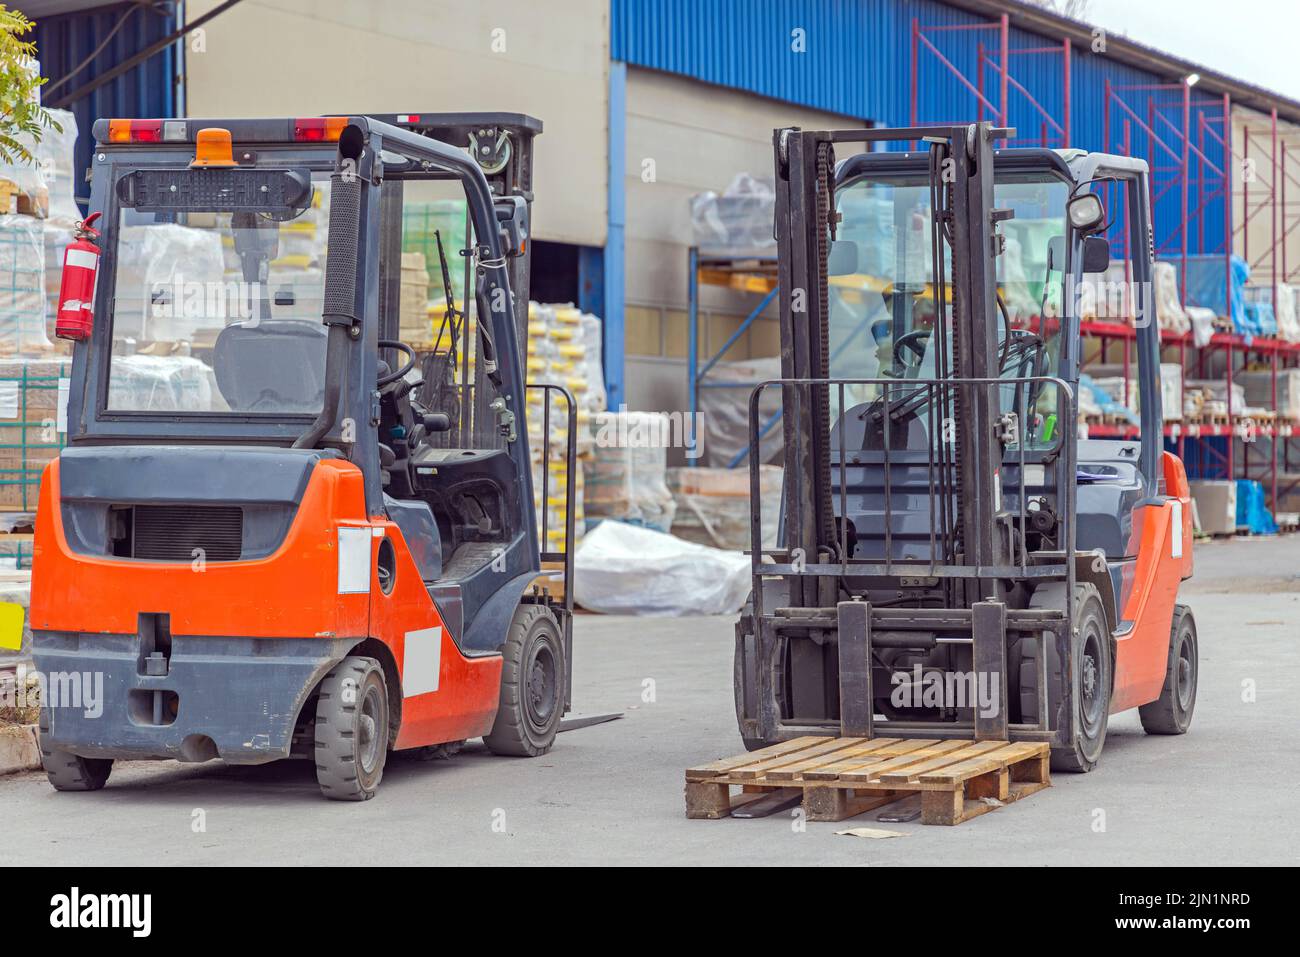 Two Forklift Machine Vehicles at Open Warehouse Storage Transport Stock Photo